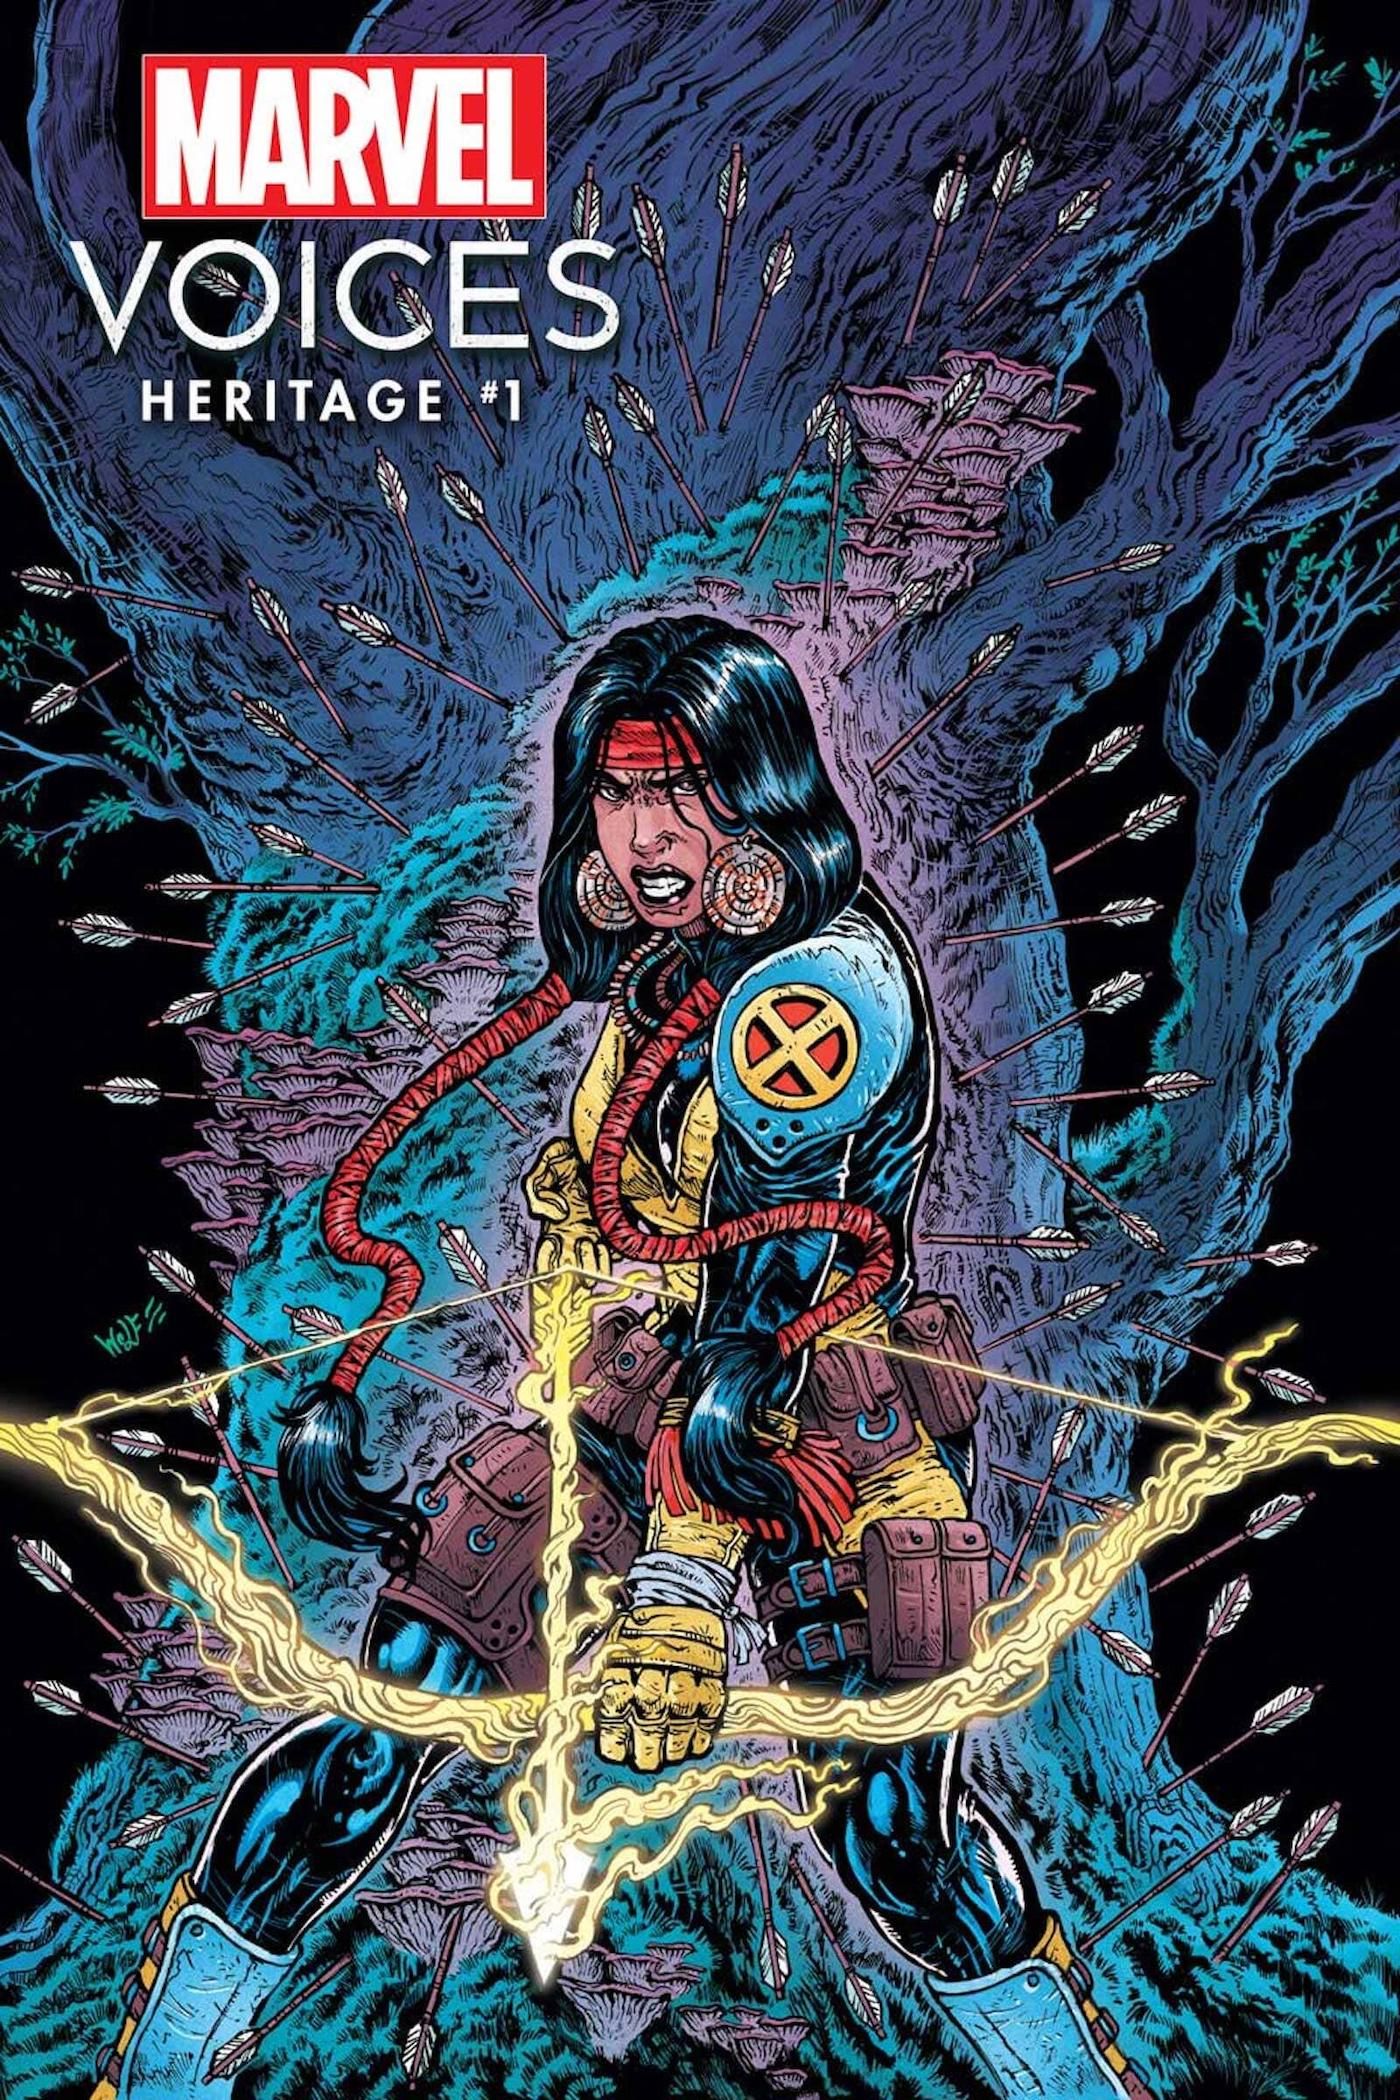 Marvels Voices Heritage Showcases Gorgeous Art of Indigenous Heroes